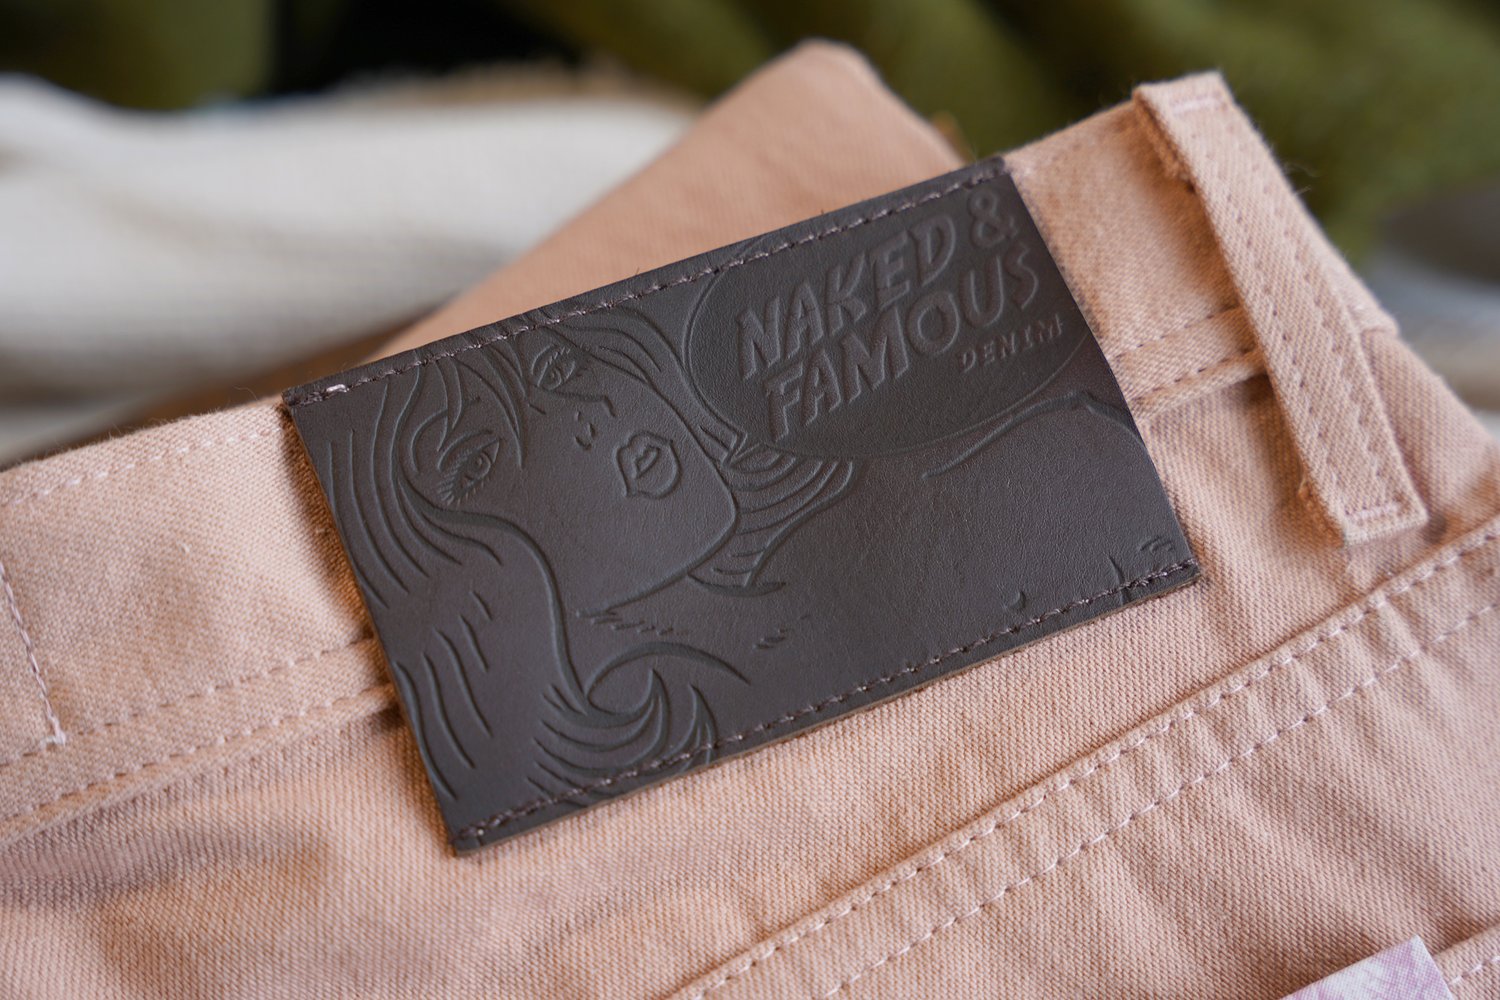 Dusty Rose Denim - Leather Patch